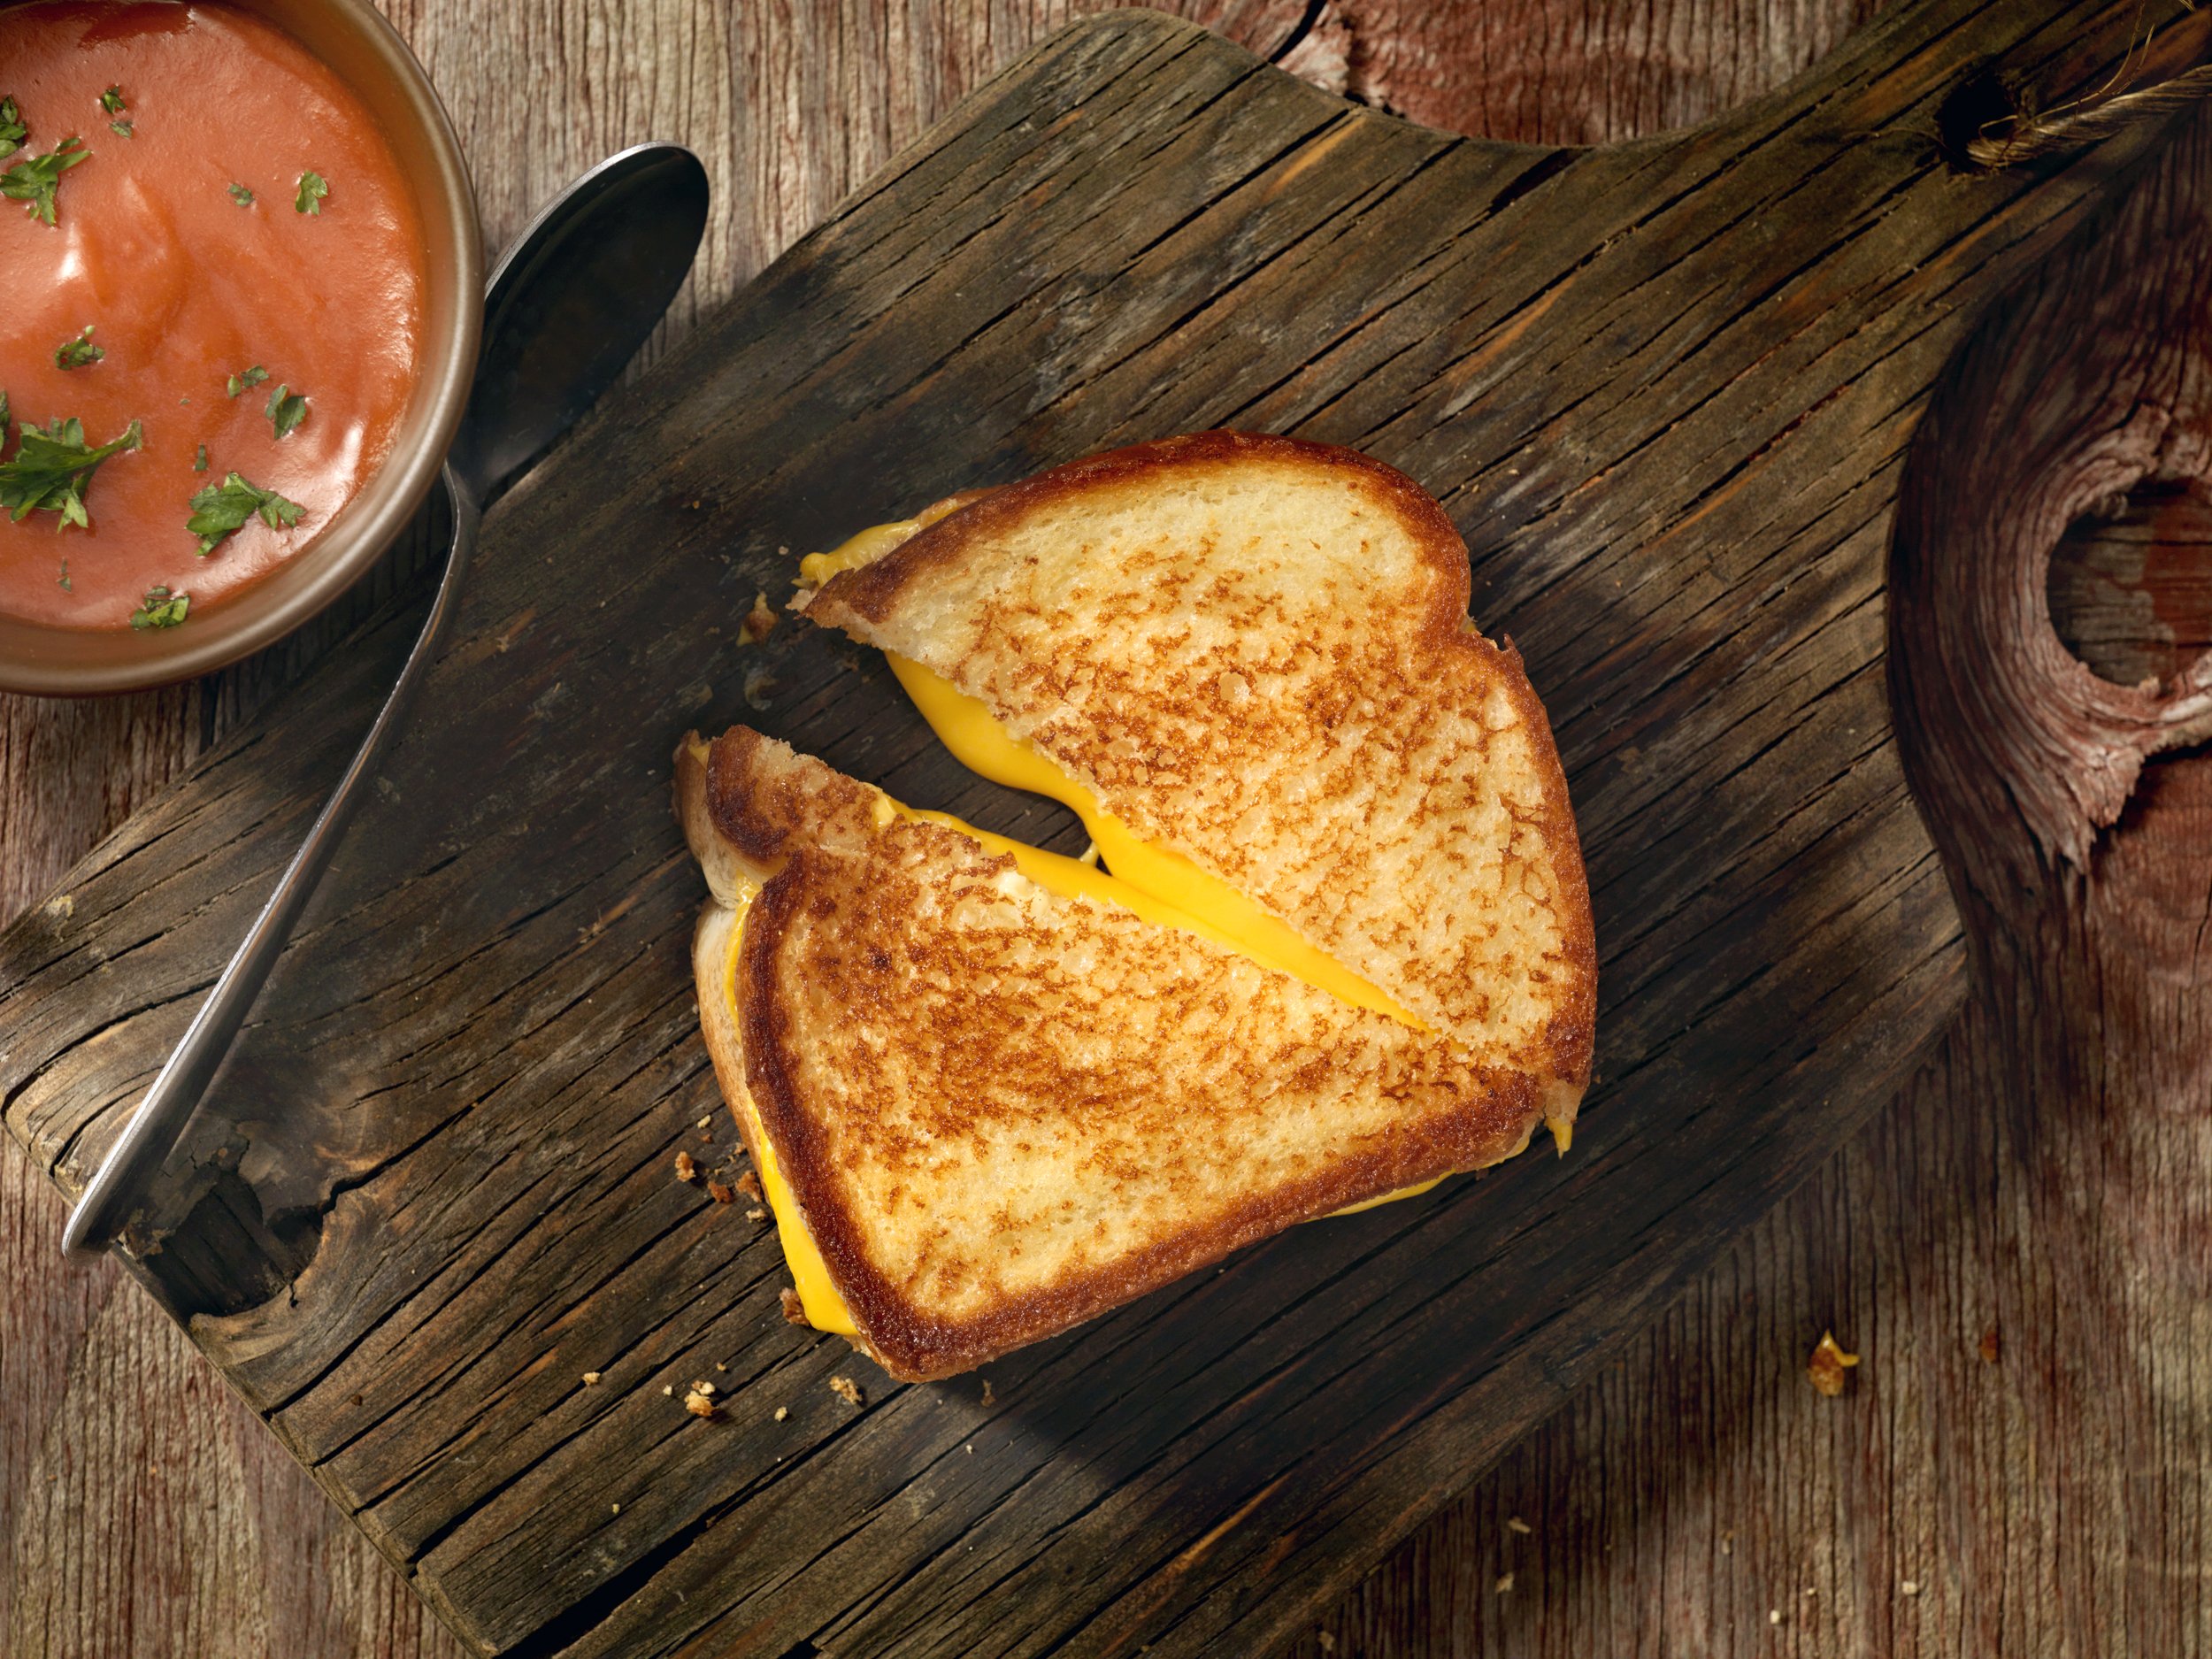 For the ultimate grilled cheese, use both stovetop and oven